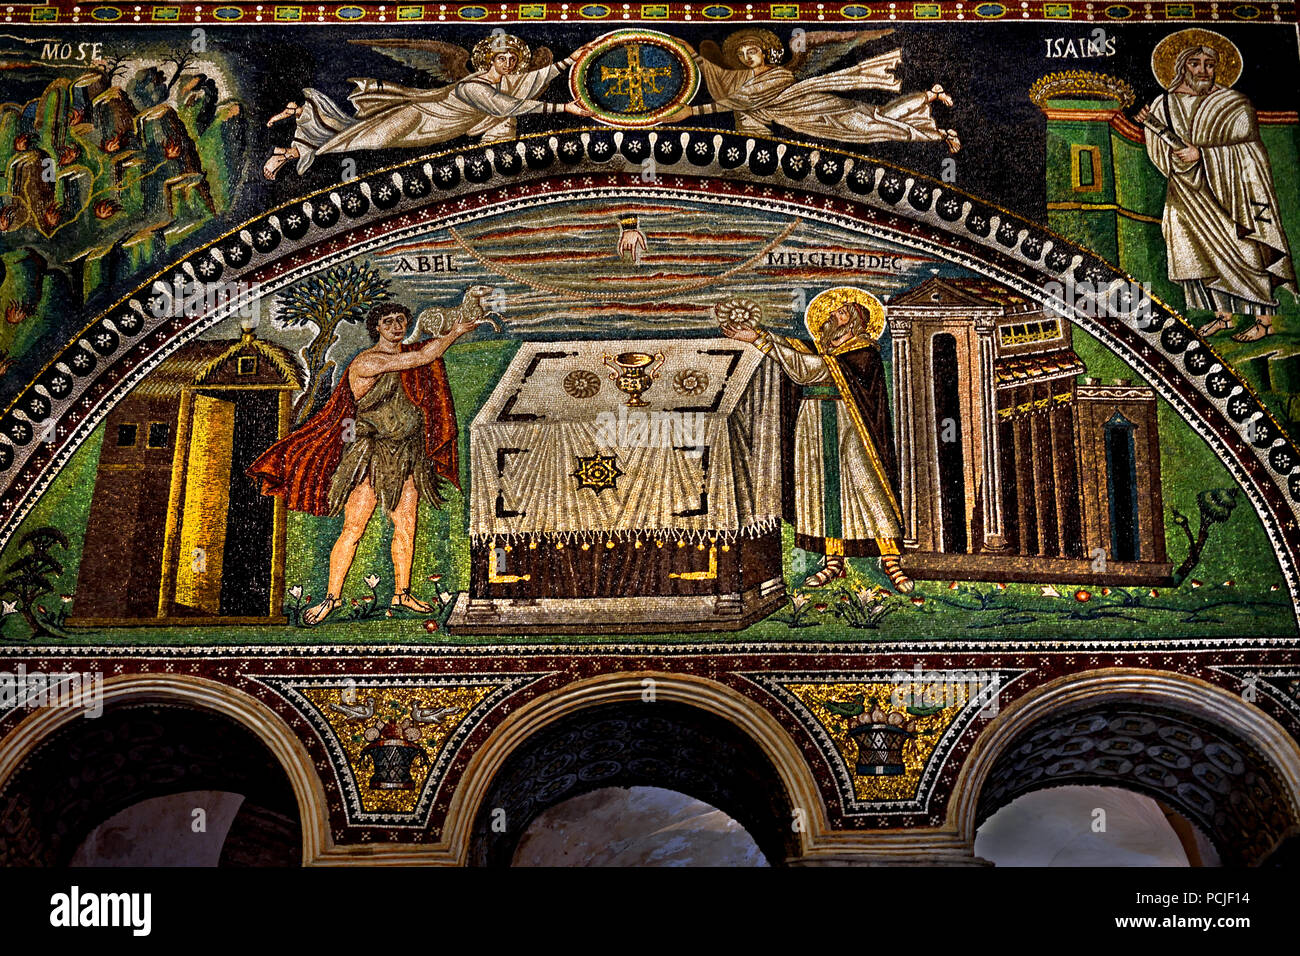 Sacrifice of Abel and Melchisedek in the Basilica of San Vitale 547 AD 6th Century in Ravenna - Mosaics ( late Roman and Byzantine architecture,) Emilia-Romagna - Northern Italy. ( UNESCO World Heritage site ) Stock Photo